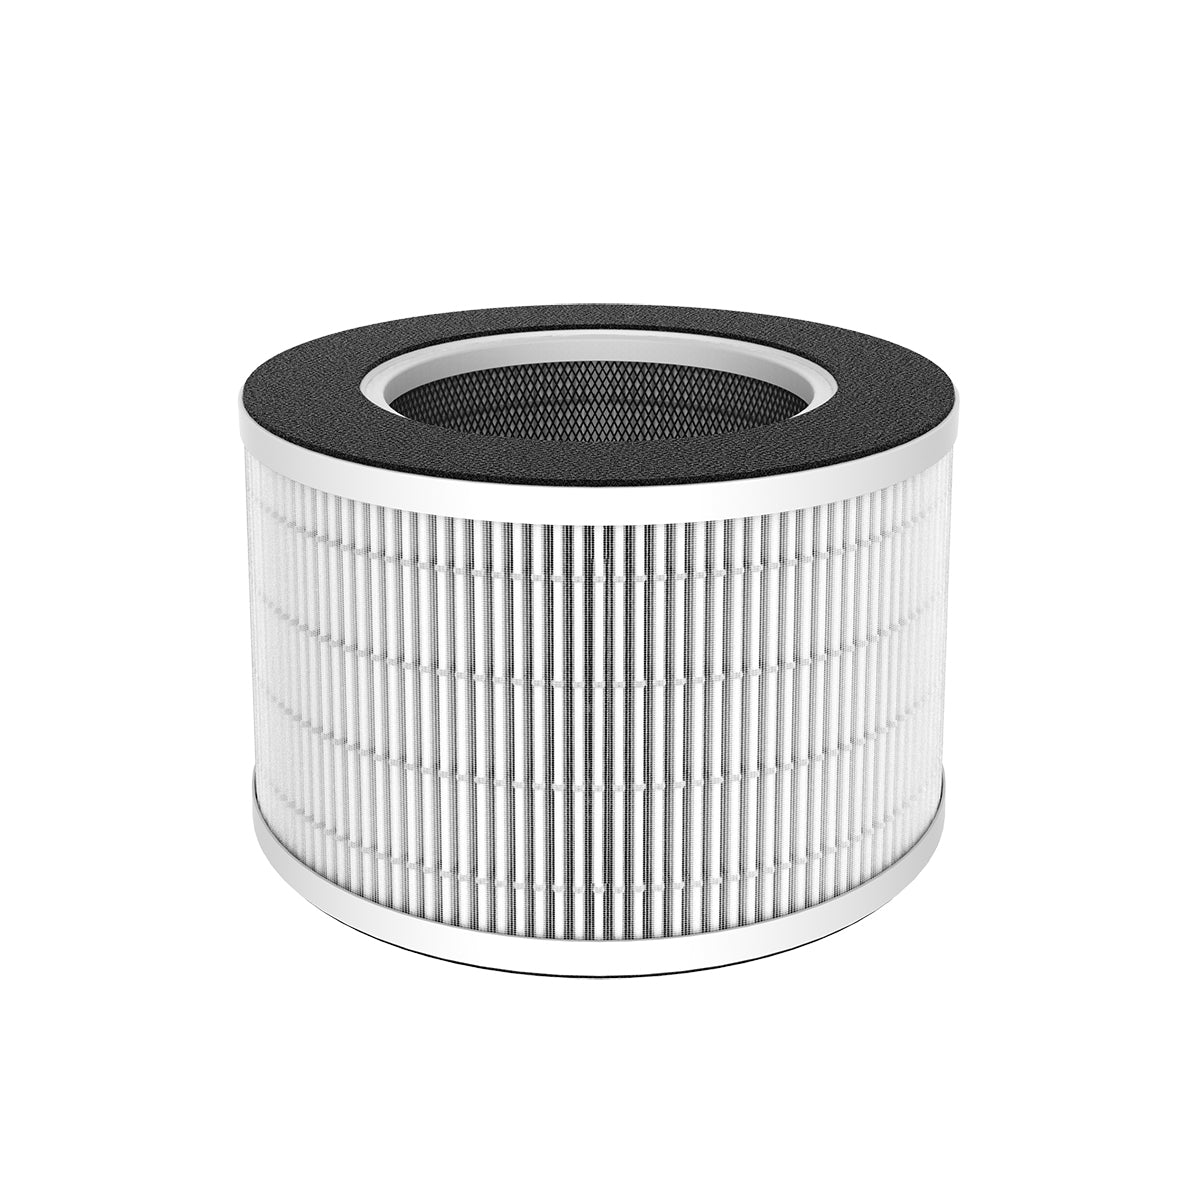 Air Purifier HEPA Filter (16.2cm x 12.6cm) Replacement Part for the AP20.